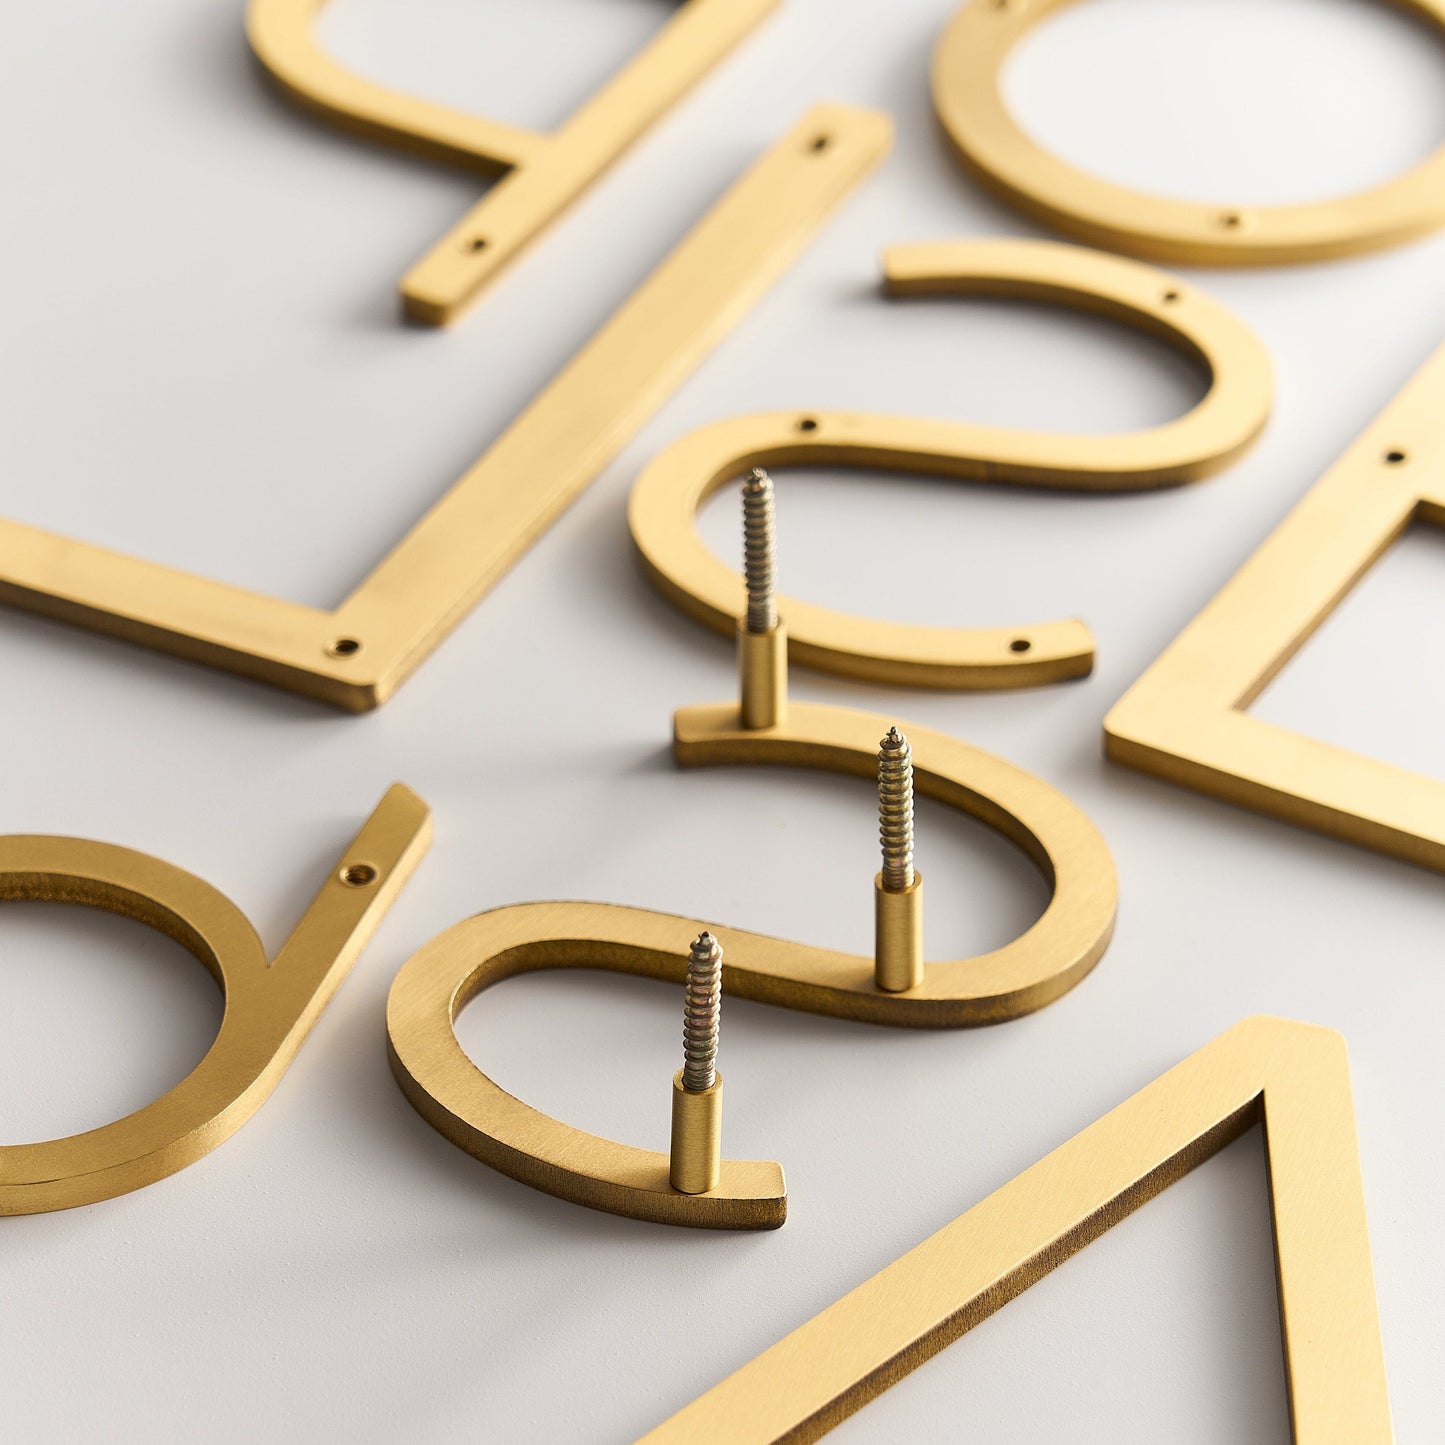 House Numbers and Letters Bayside Luxe Signage - Solid Satin Brass Floating House Numbers and Letters - Watson's Bay 15cm